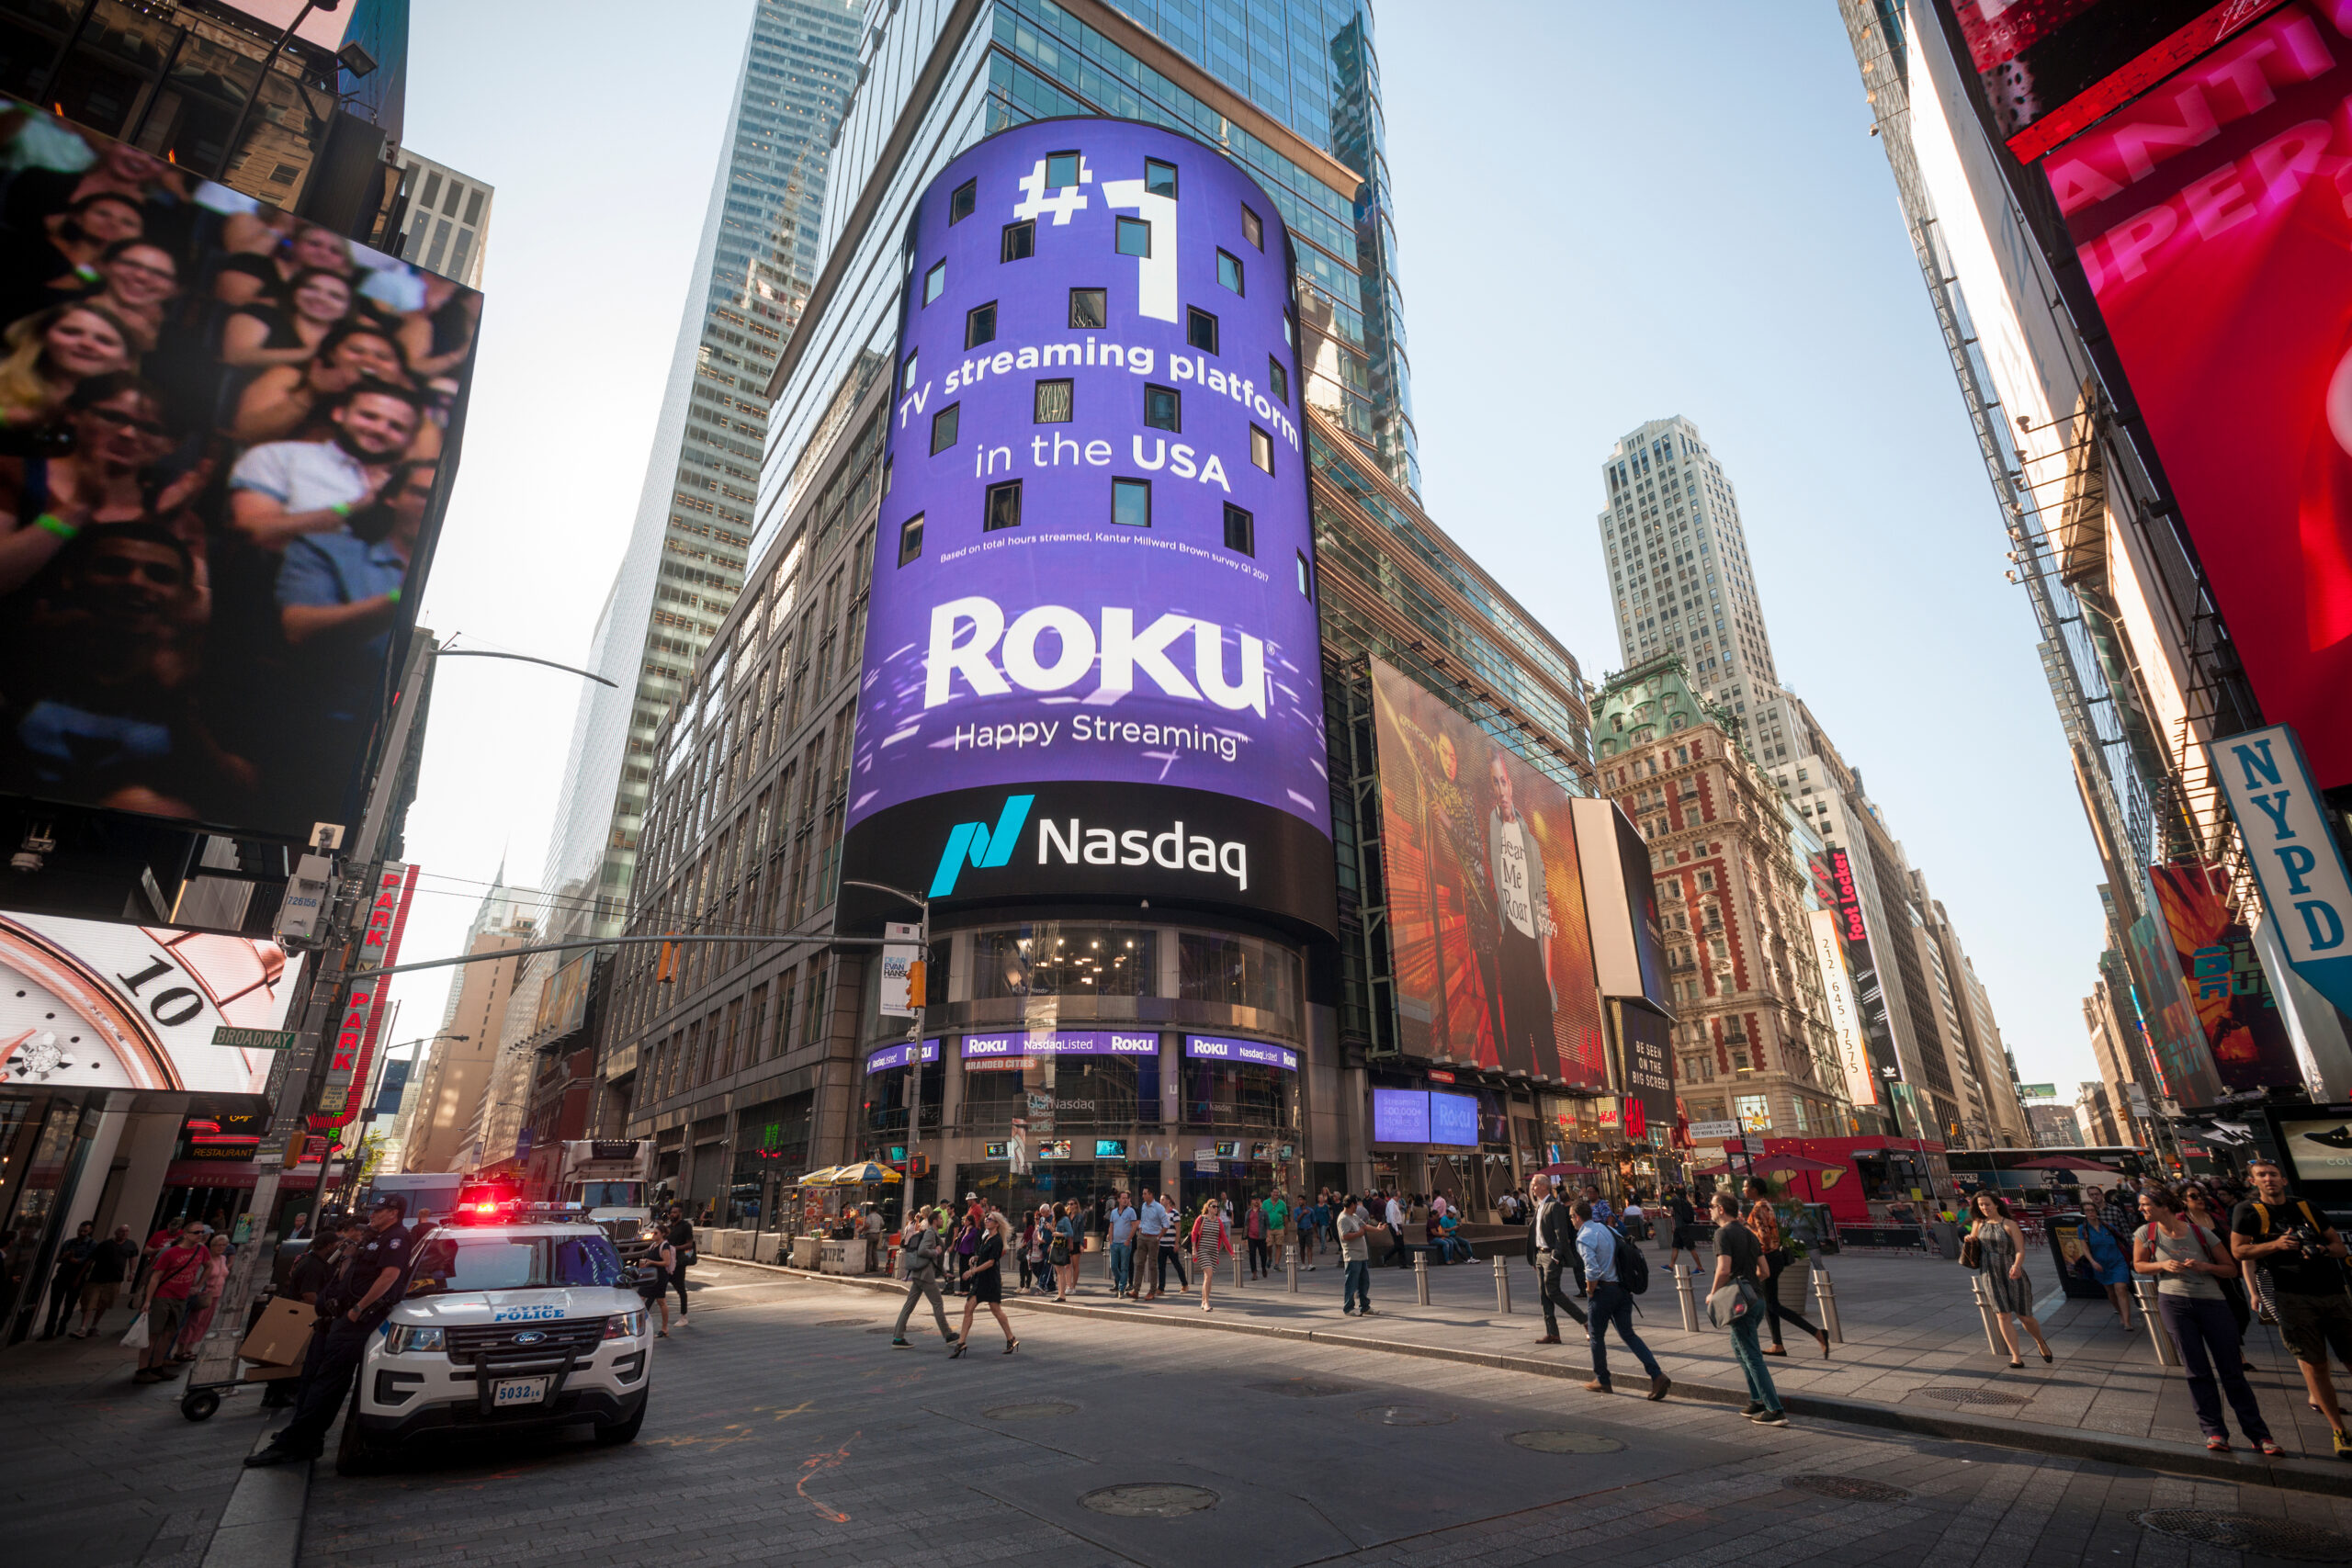 Roku Stock Price Drops On -$0.88 Per Share Earnings Loss